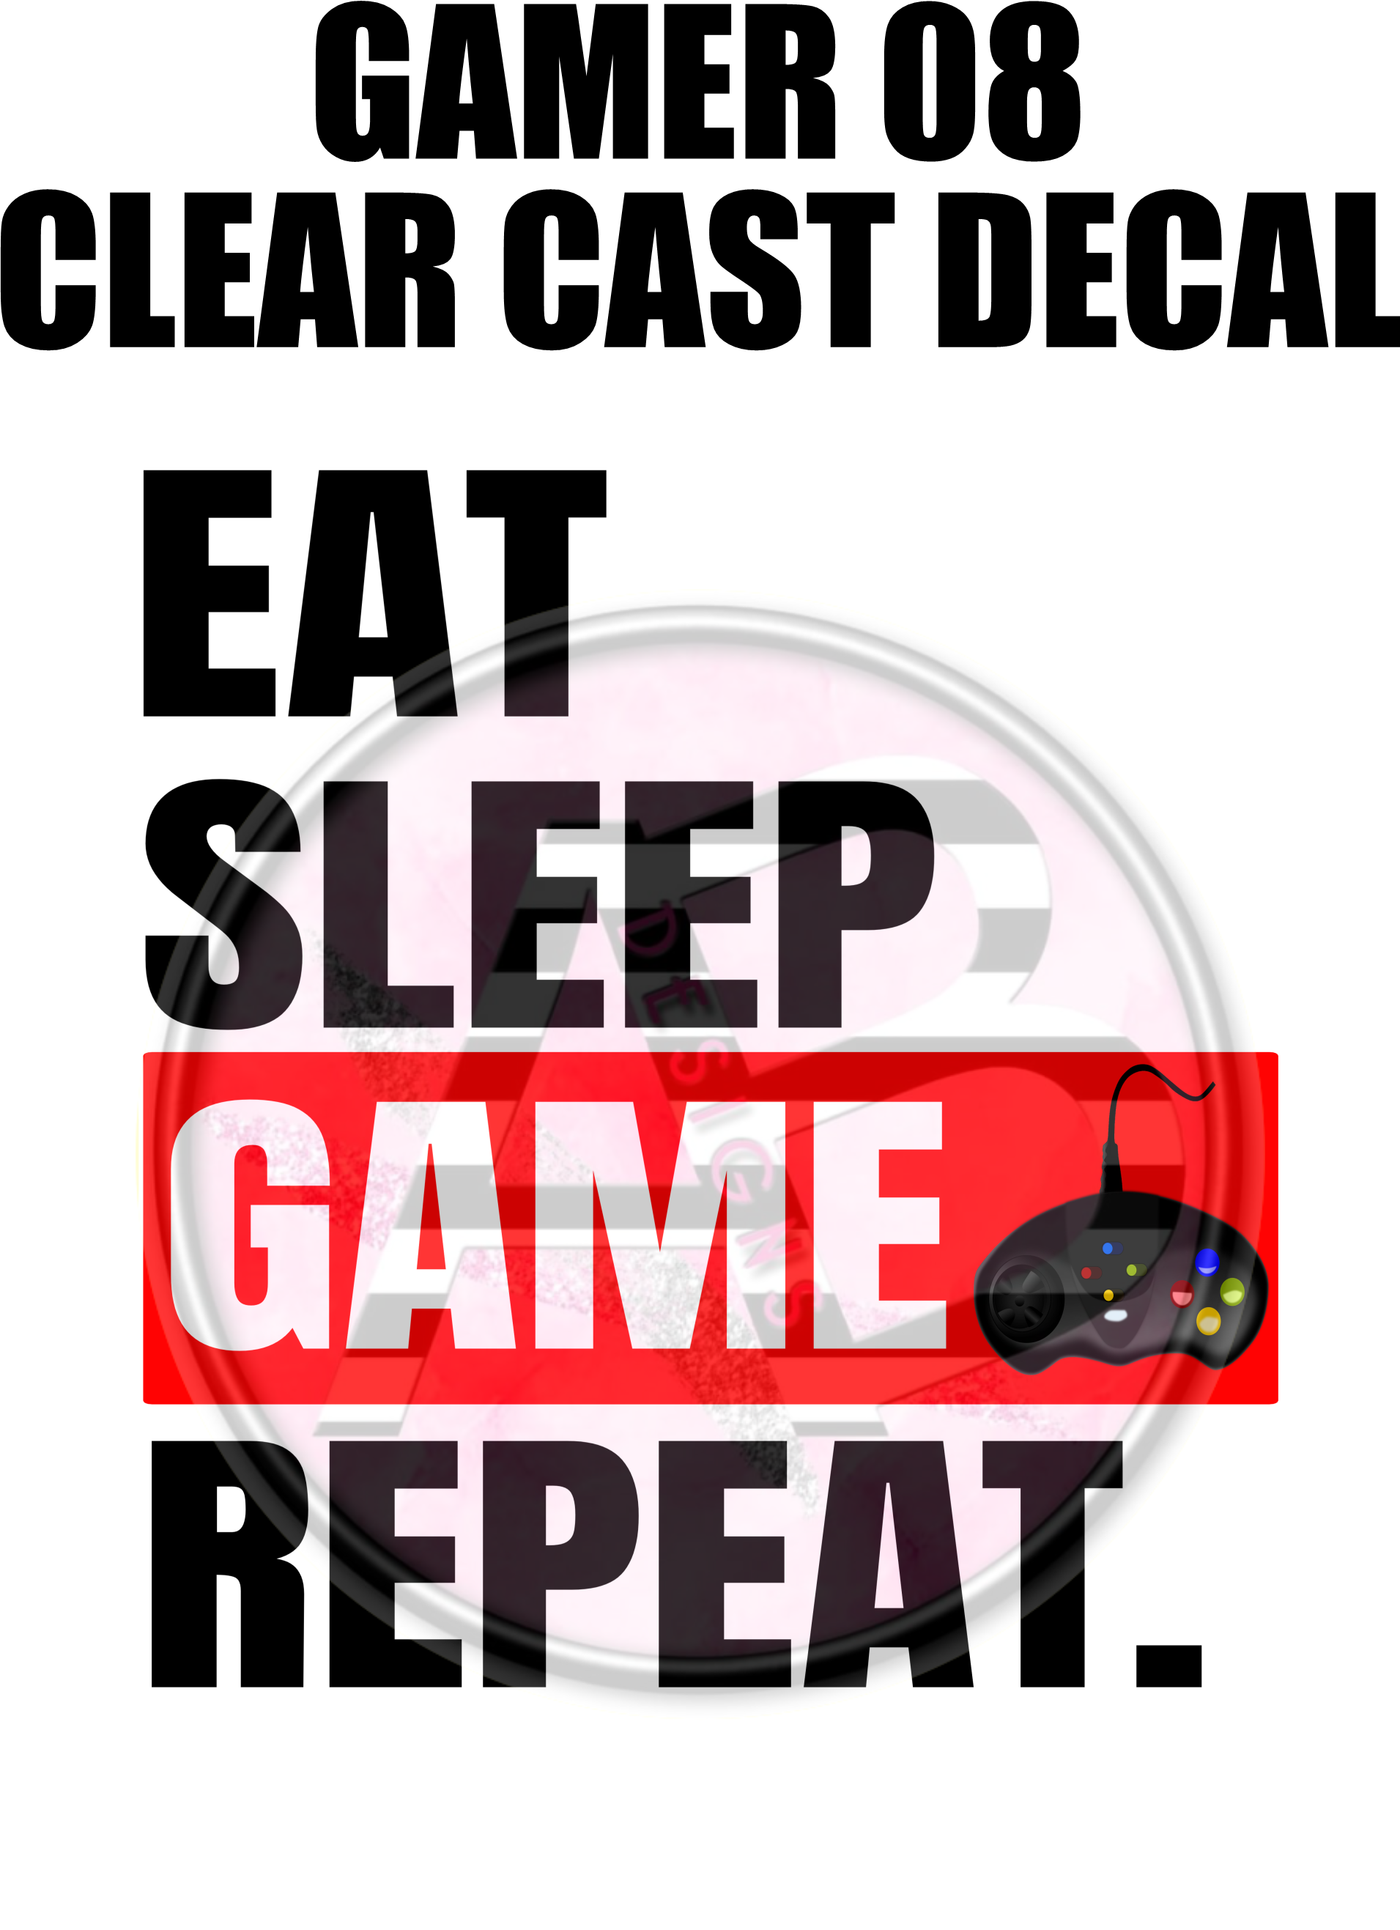 Gamer 08 - Clear Cast Decal